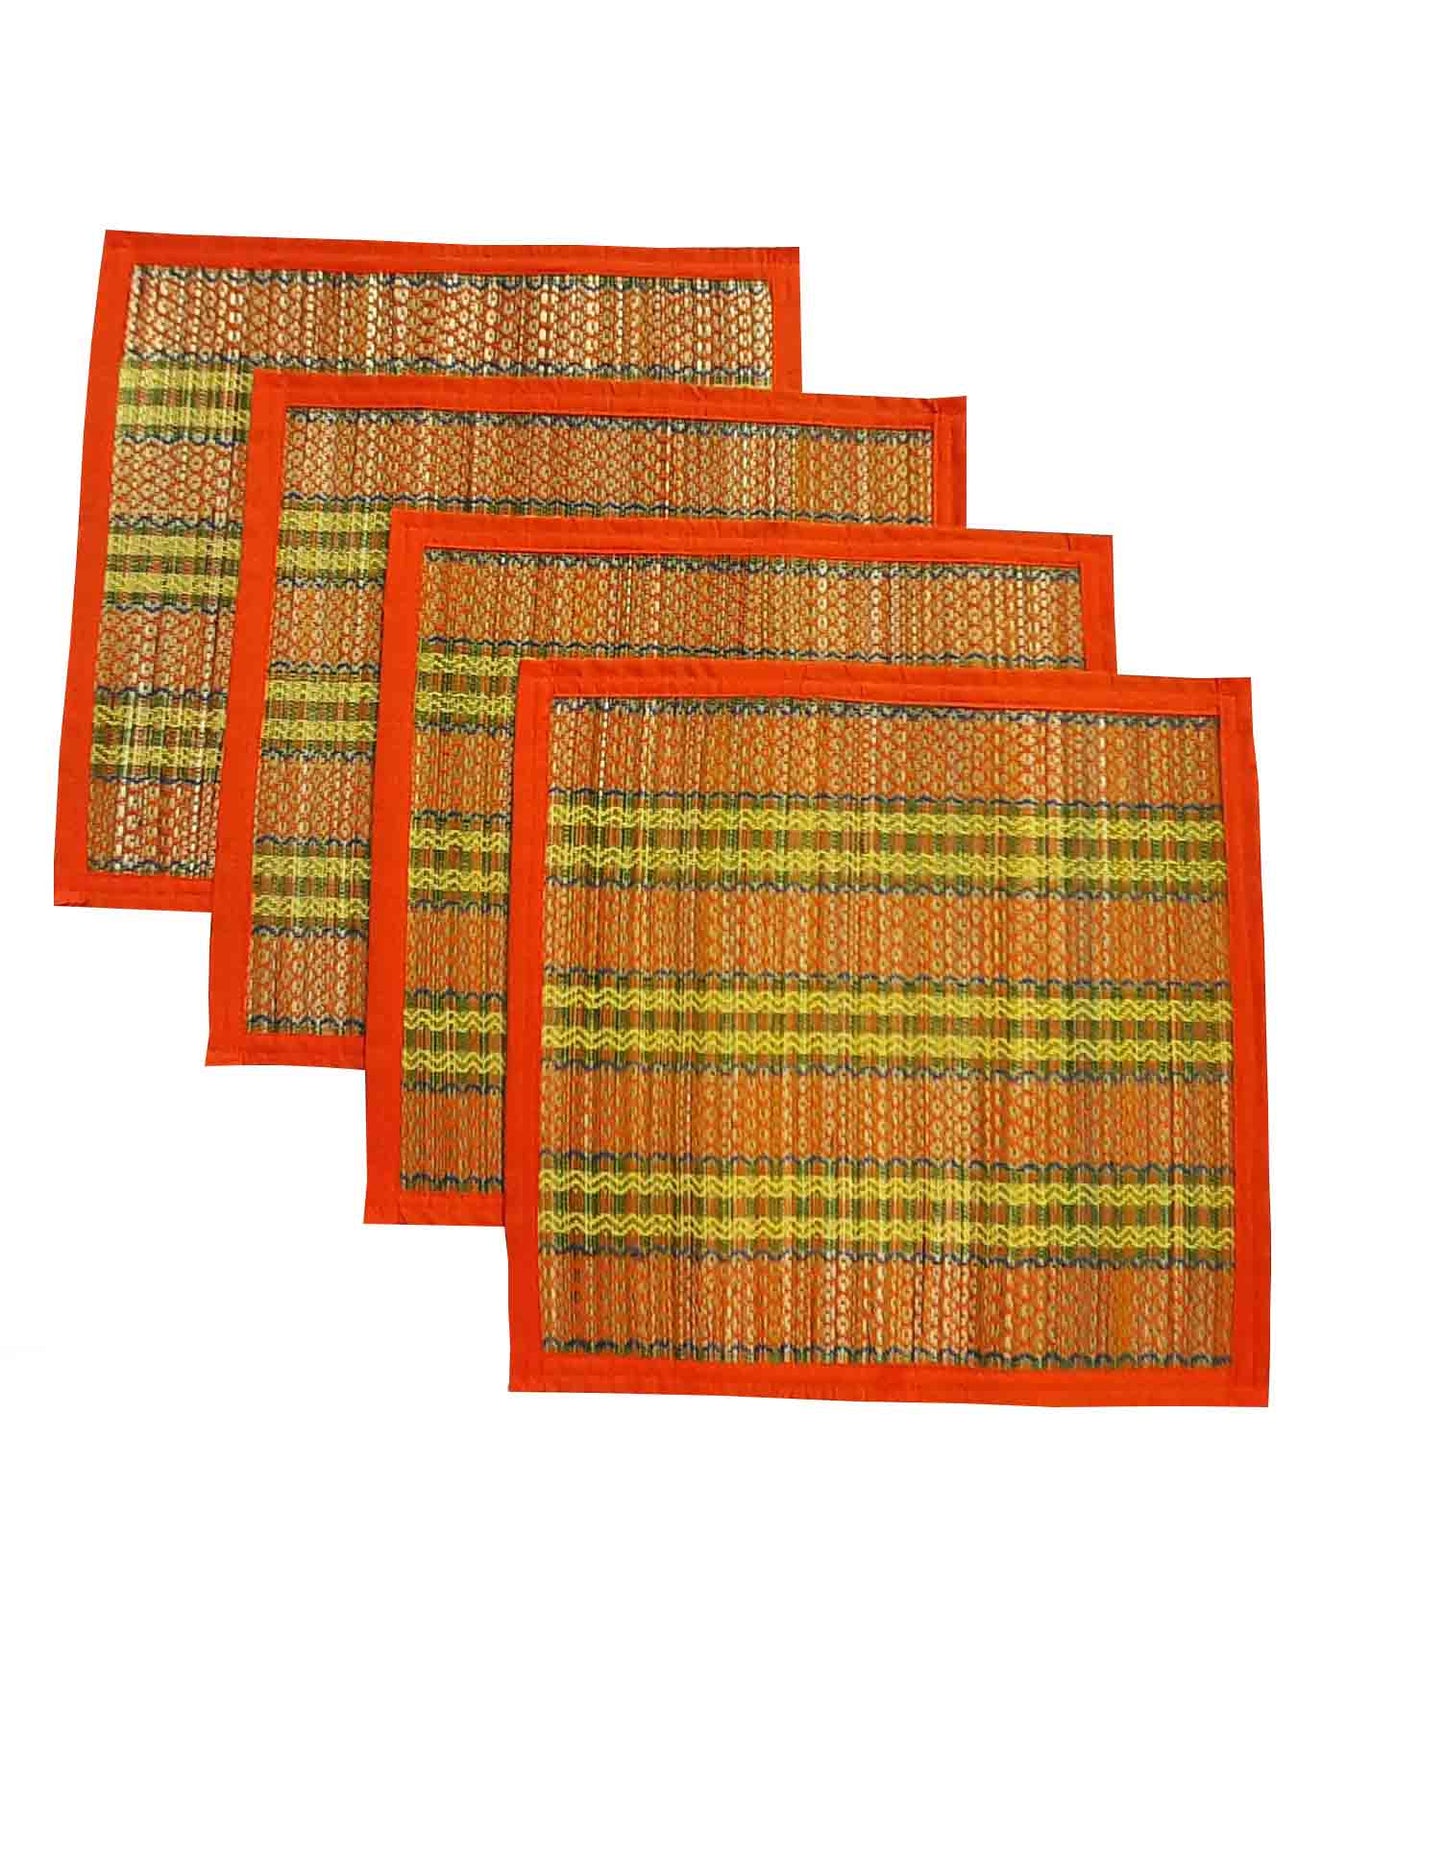 Pooja mat for sitting on floor Madurkathi grass made pooja aasan (18x18 inches) pack of 2 square shape holy alternative to Velvet puja aasan T3-41